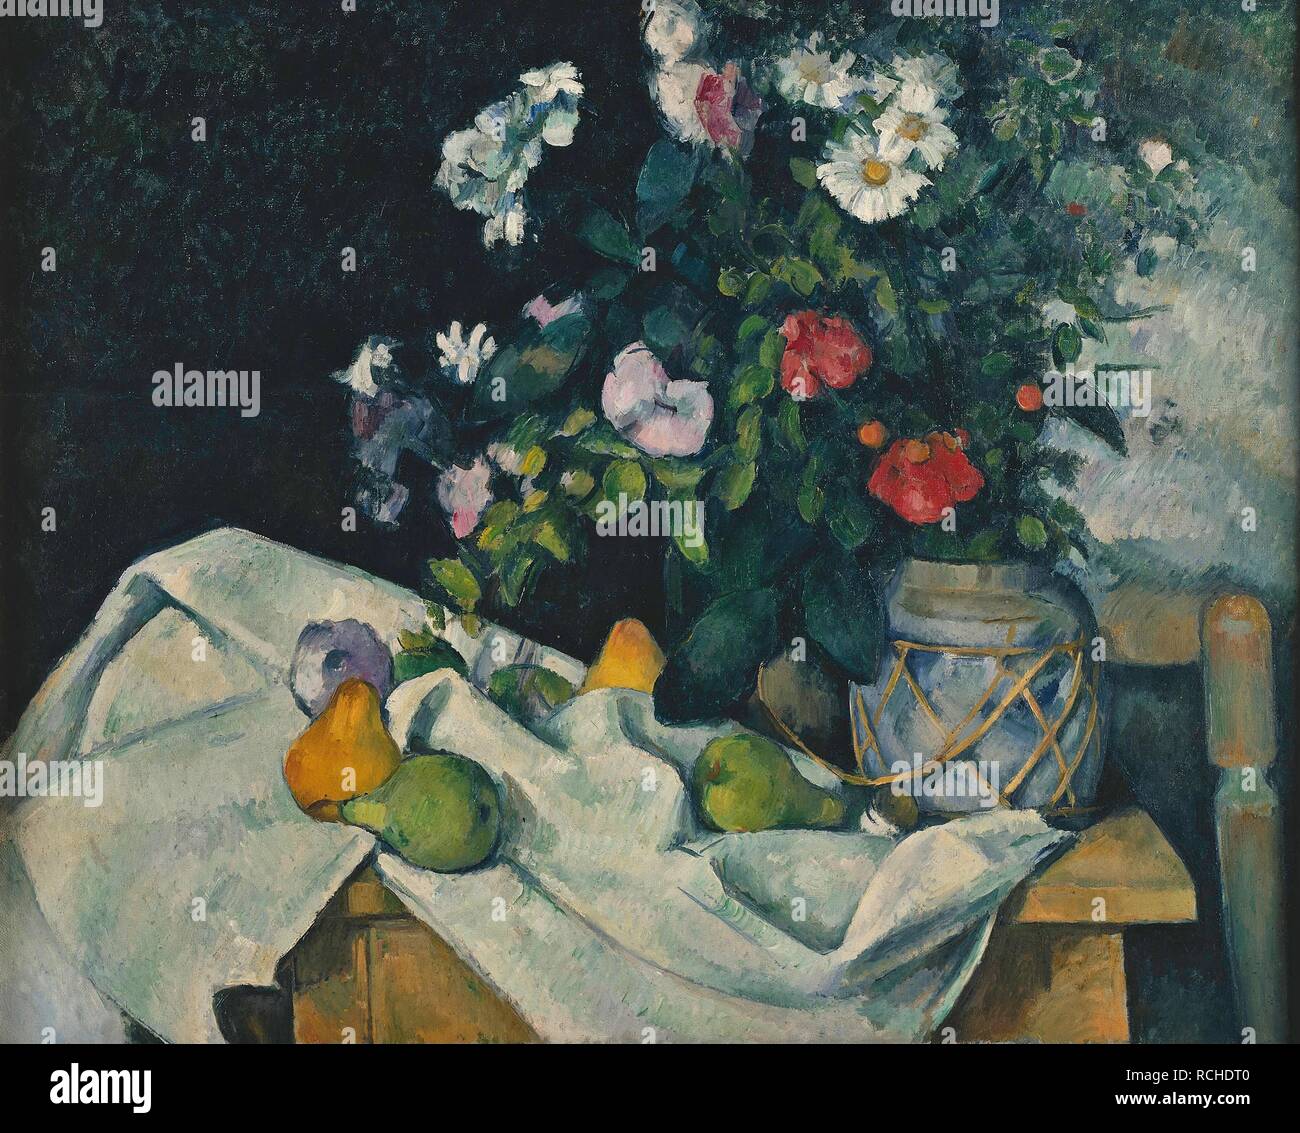 Still Life with Flowers and Fruit. Museum: Staatliche Museen, Berlin. Author: CEZANNE, PAUL. Stock Photo